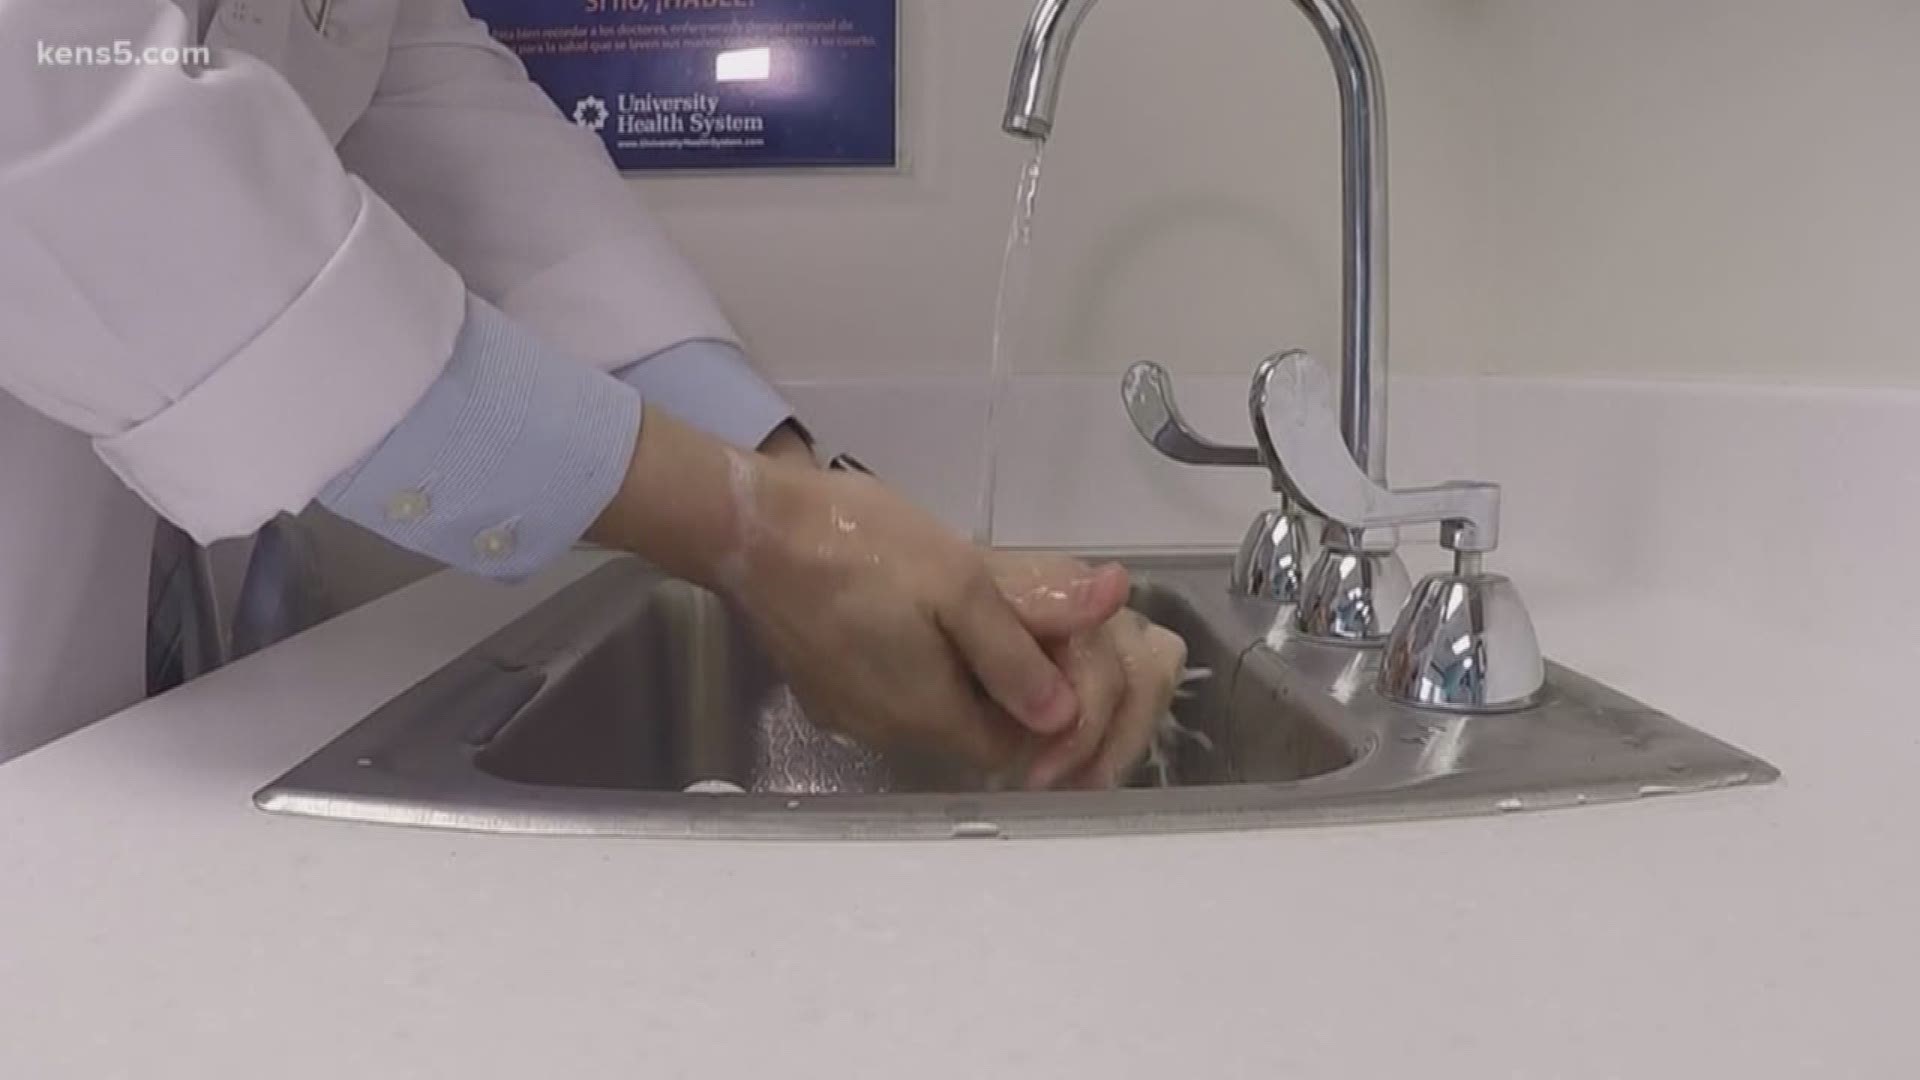 Washing your hands. It is so simple! But most of us don't do it often enough, or when we should.